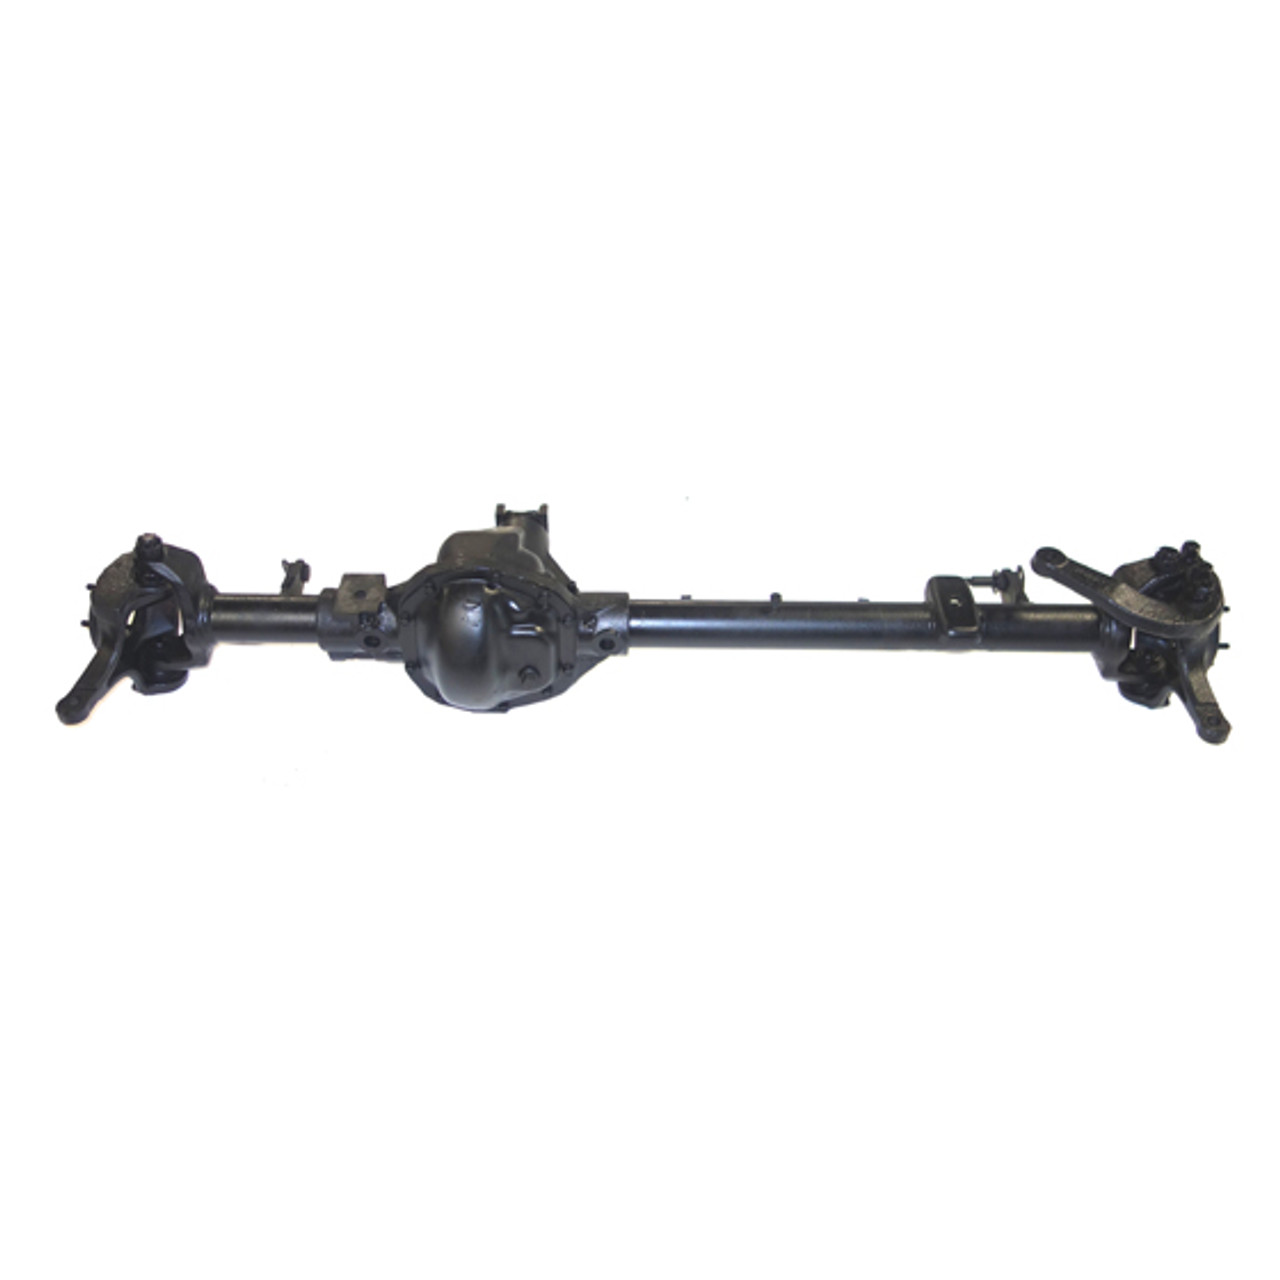 Reman Complete Axle Assembly for Dana 60 89-93 Dodge W250 4.11 Ratio